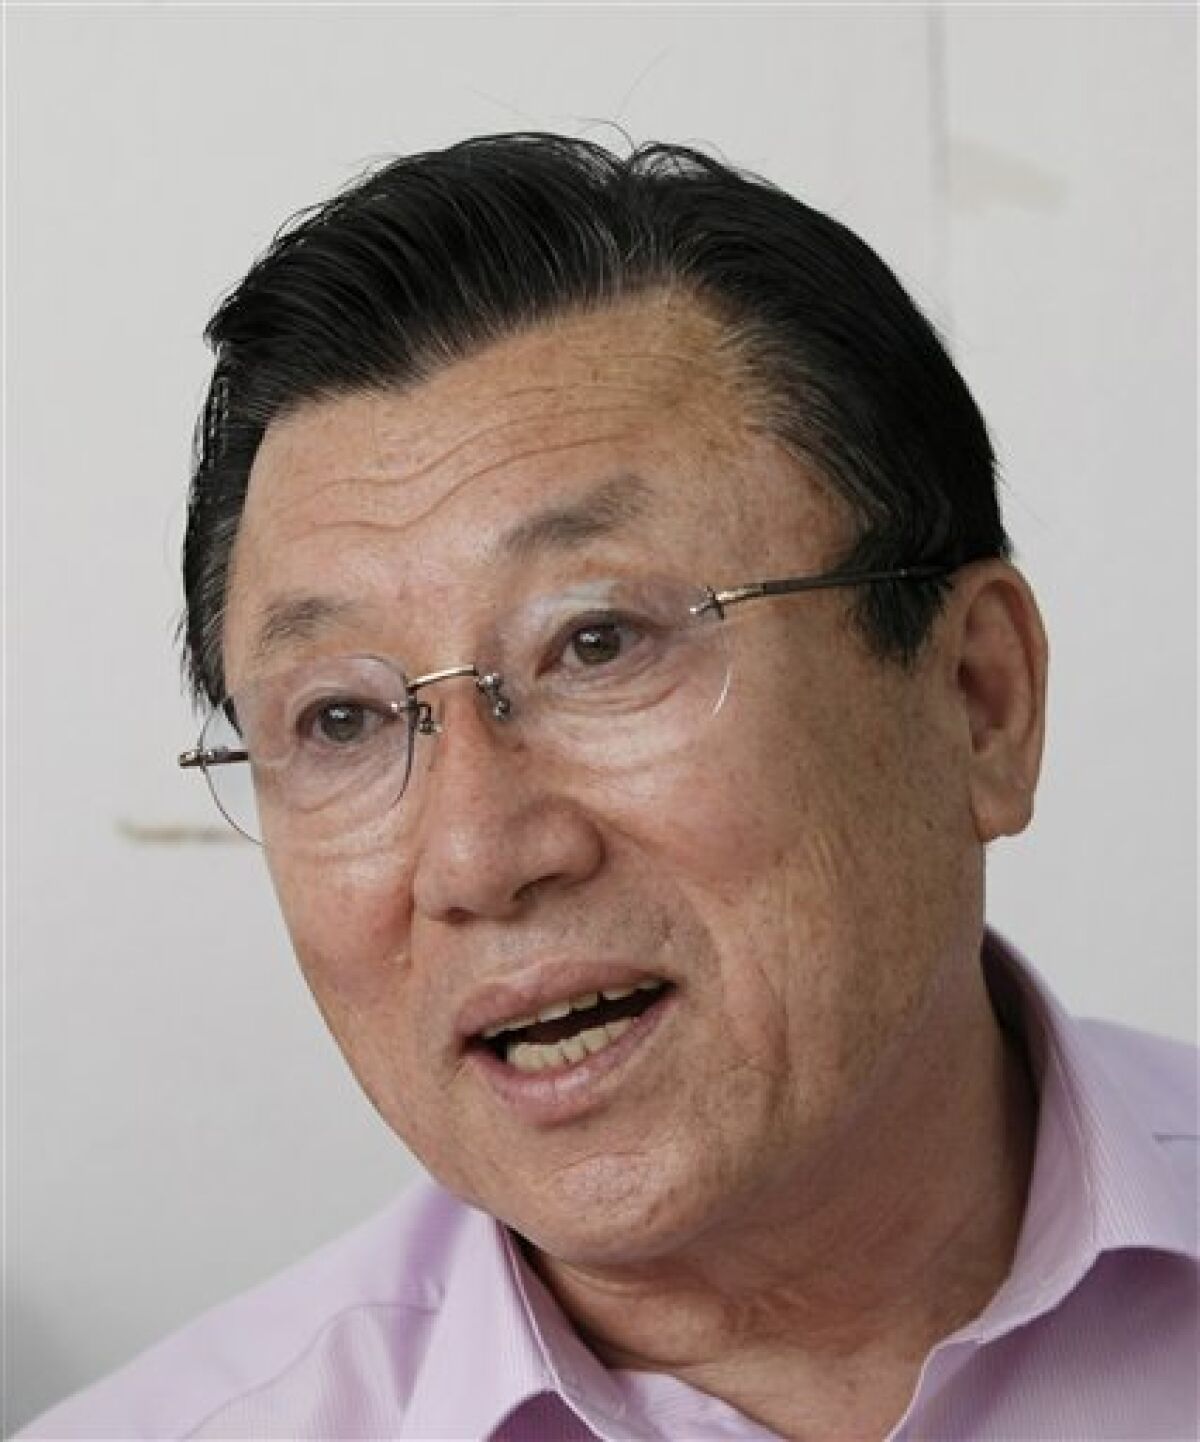 In this June 9, 2010, photo, Oh Won-rok, head of a national association of 80 survivors' groups, talks during an interview with The Associated Press in Seoul, South Korea. In a political about-face, a South Korean commission investigating a century of human rights abuses, including the U.S. military's large-scale killing of Korean War refugees, has ruled the Americans in case after case acted out of military necessity. In 2008, the commission, then including more liberal members, recommended seeking U.S. compensation in a handful of such cases, but Seoul's conservative government has not acted. "It's regrettable the United States seems indifferent to these incidents," said Oh. (AP Photo/Ahn Young-joon)